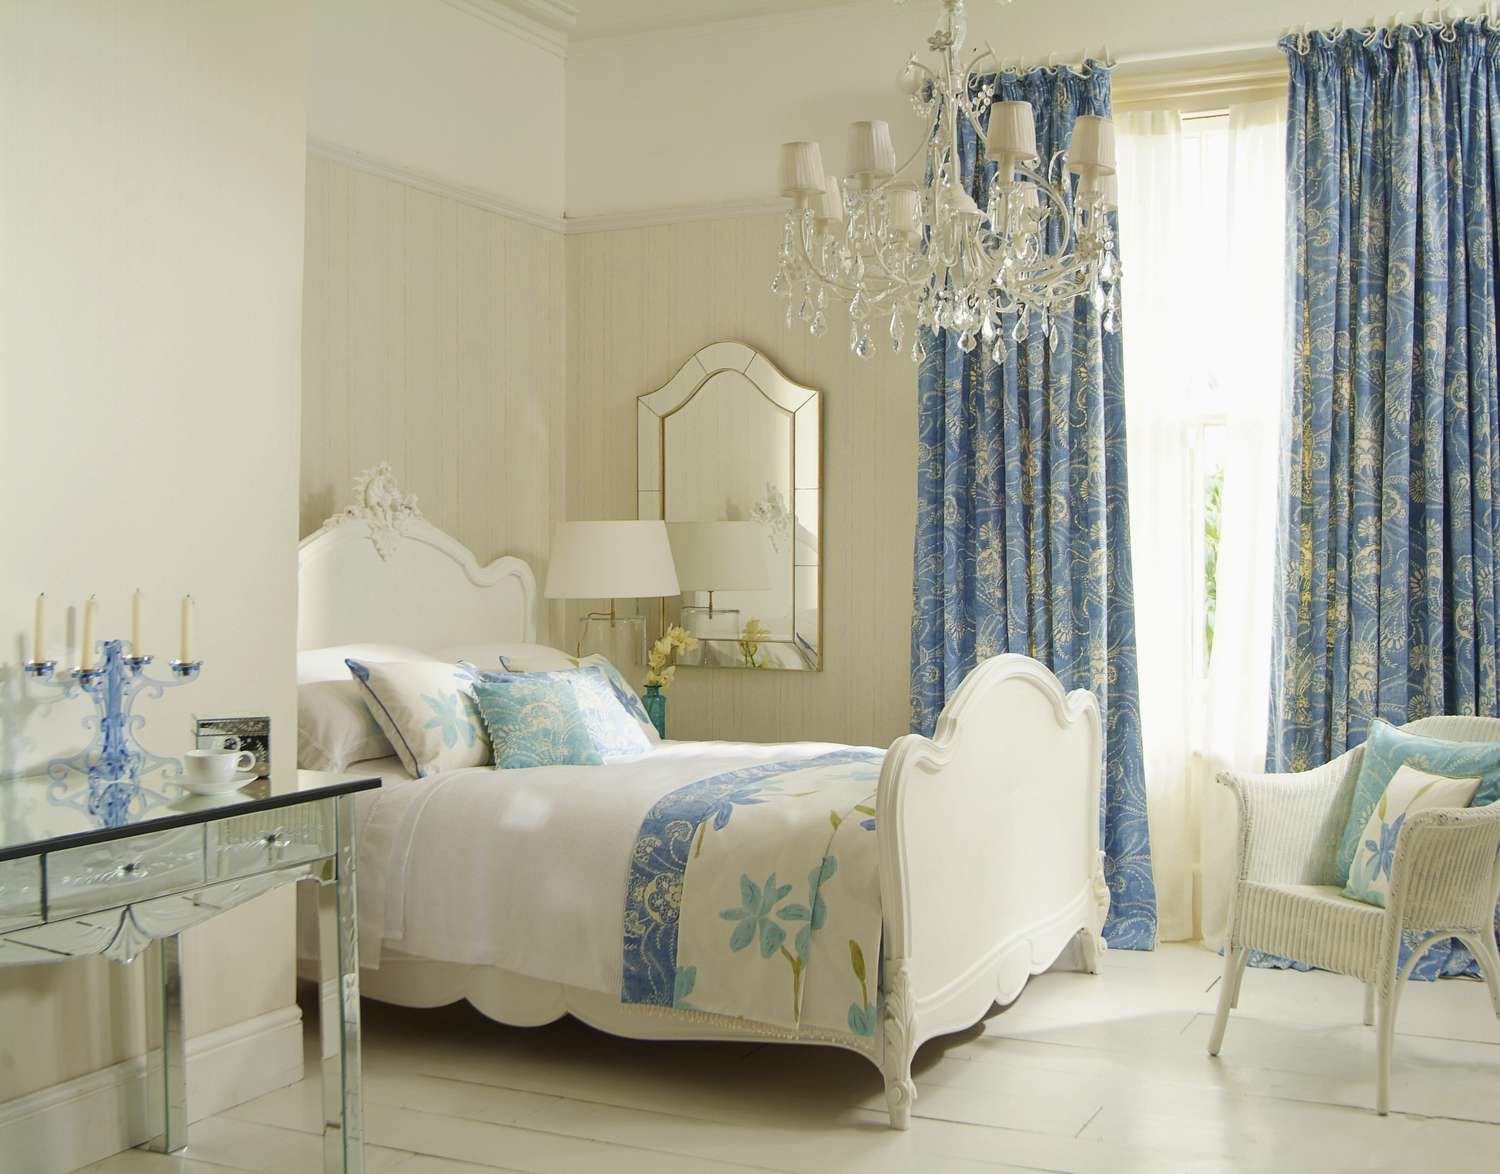 glamorous bedroom with blue floral drapes and white furniture with cream and blue accents